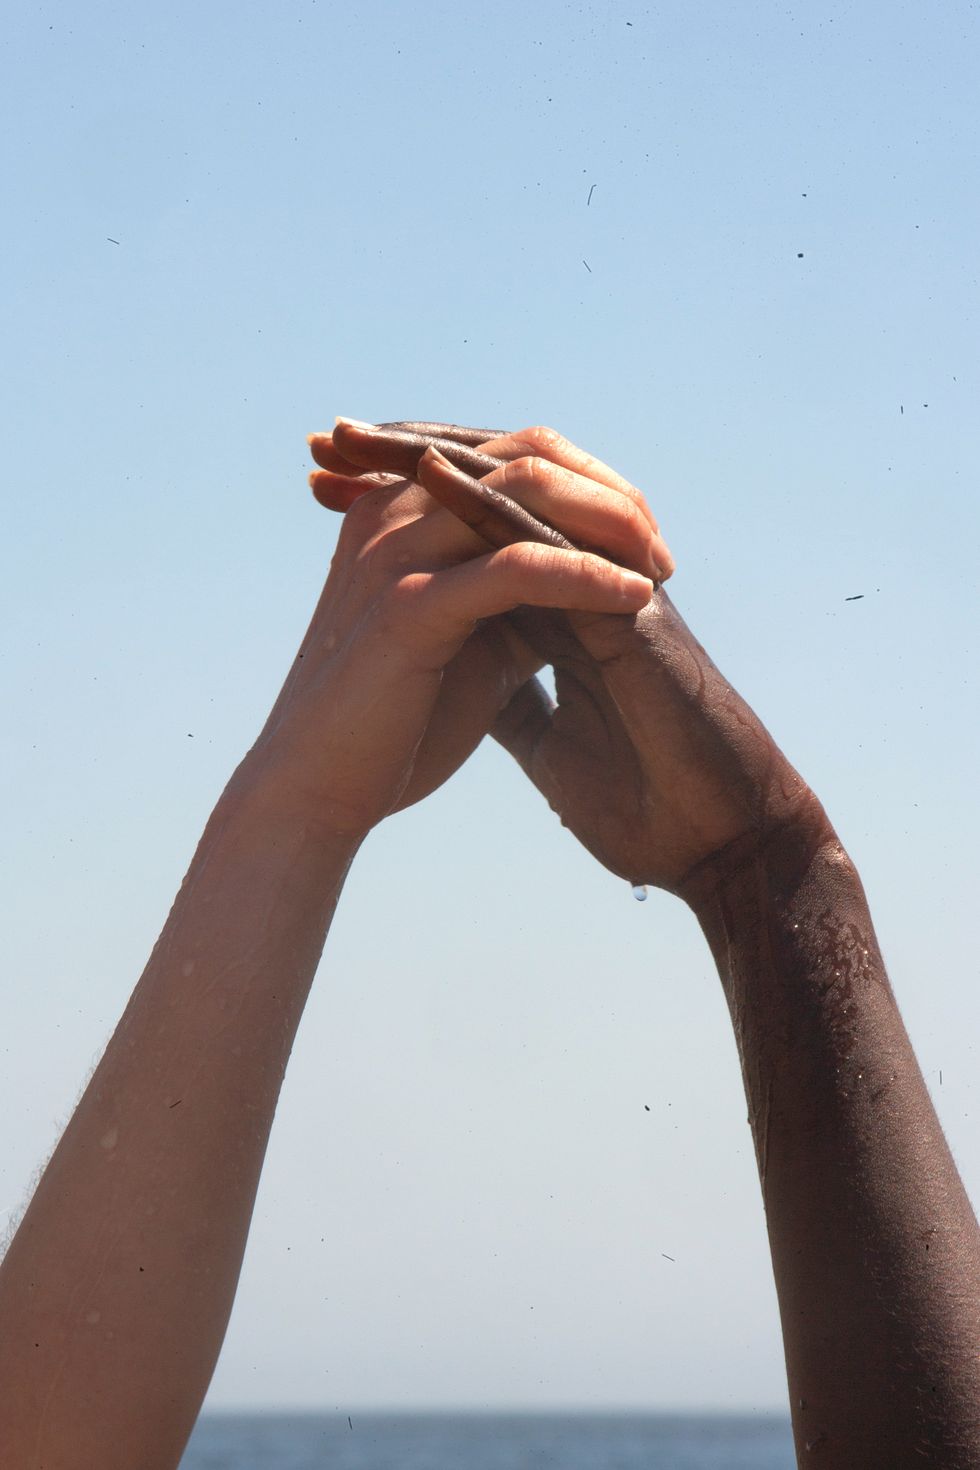 intermeshed fingers of two hands of separate people, with droplets of water dripping off the one, close to the wrist, in a show of togetherness, mutual affection solidarity with a rich blue sky for background